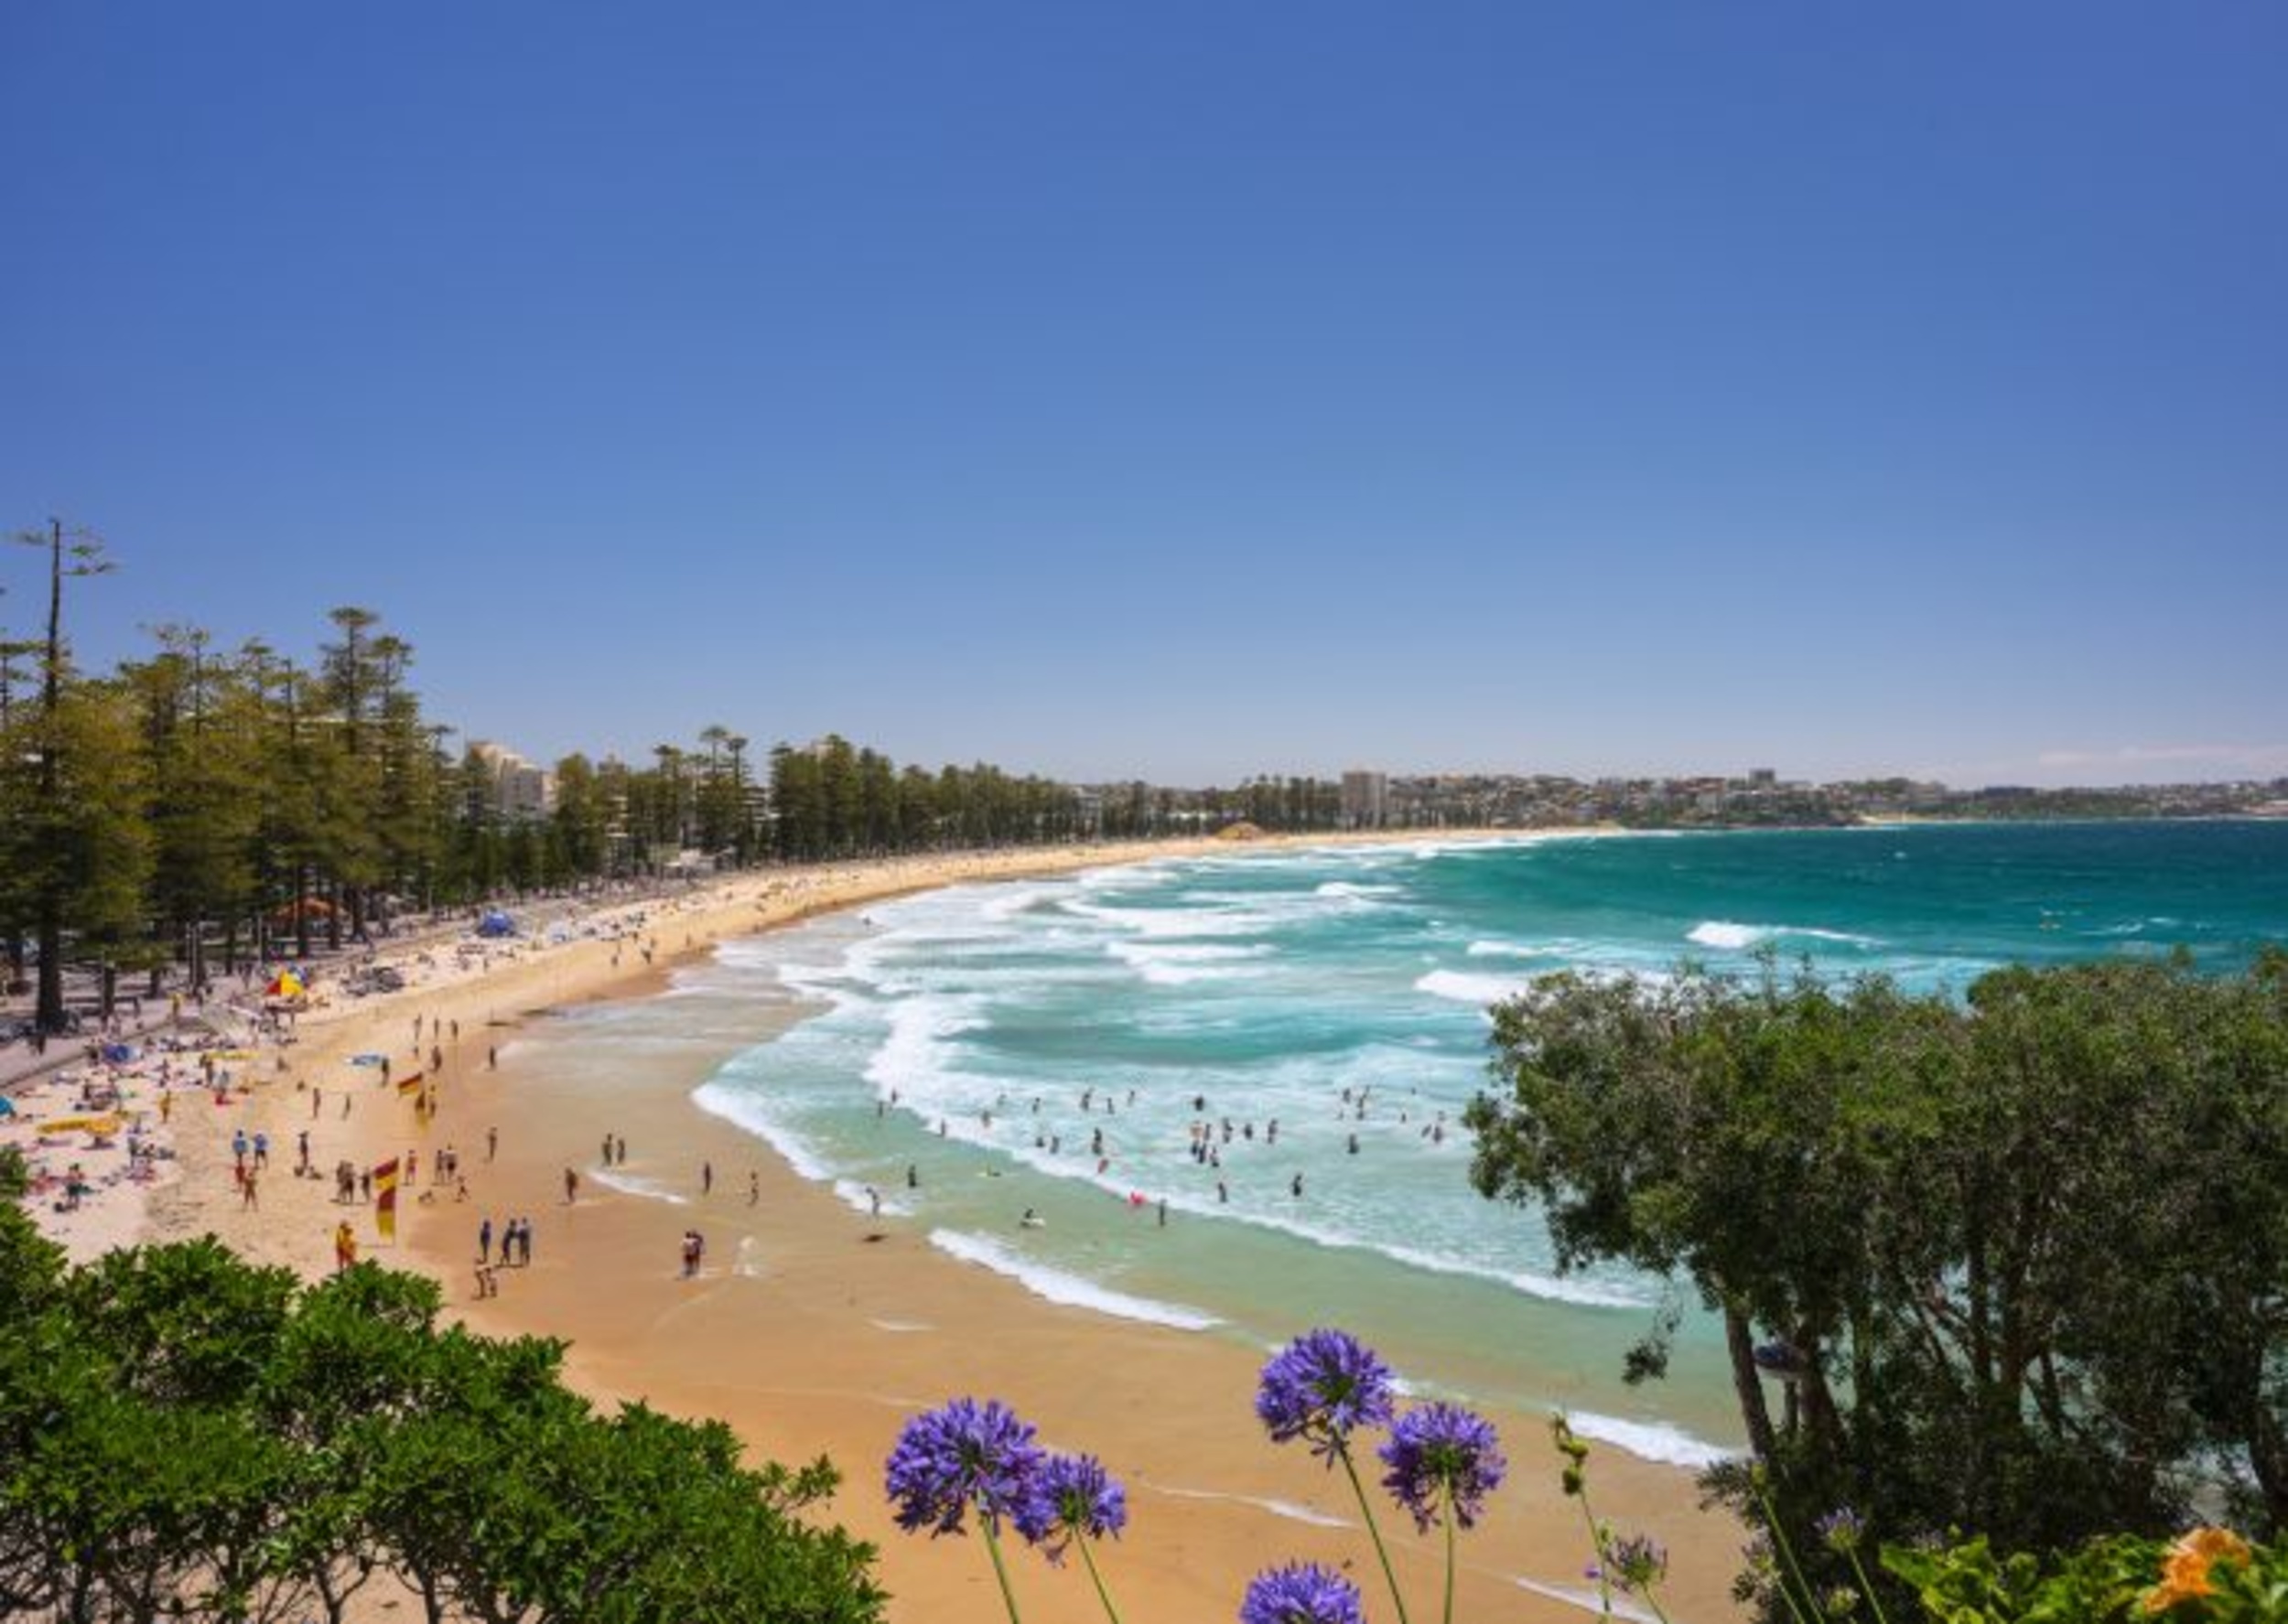 <p>Most people will tell you to visit Manly Beach after Bondi for a more relaxing sun bathing experience. There are far fewer people, but the beach is still busy with locals and tourists alike. Walk to the other side of the island from where the ferry drops you off, then find a spot in the sand to relax. It's that simple! </p><p>You may also like: <a href='https://www.yardbarker.com/lifestyle/articles/how_to_make_awesome_versions_of_your_favorite_junk_foods_at_home/s1__24359122'>How to make awesome versions of your favorite junk foods at home</a></p>